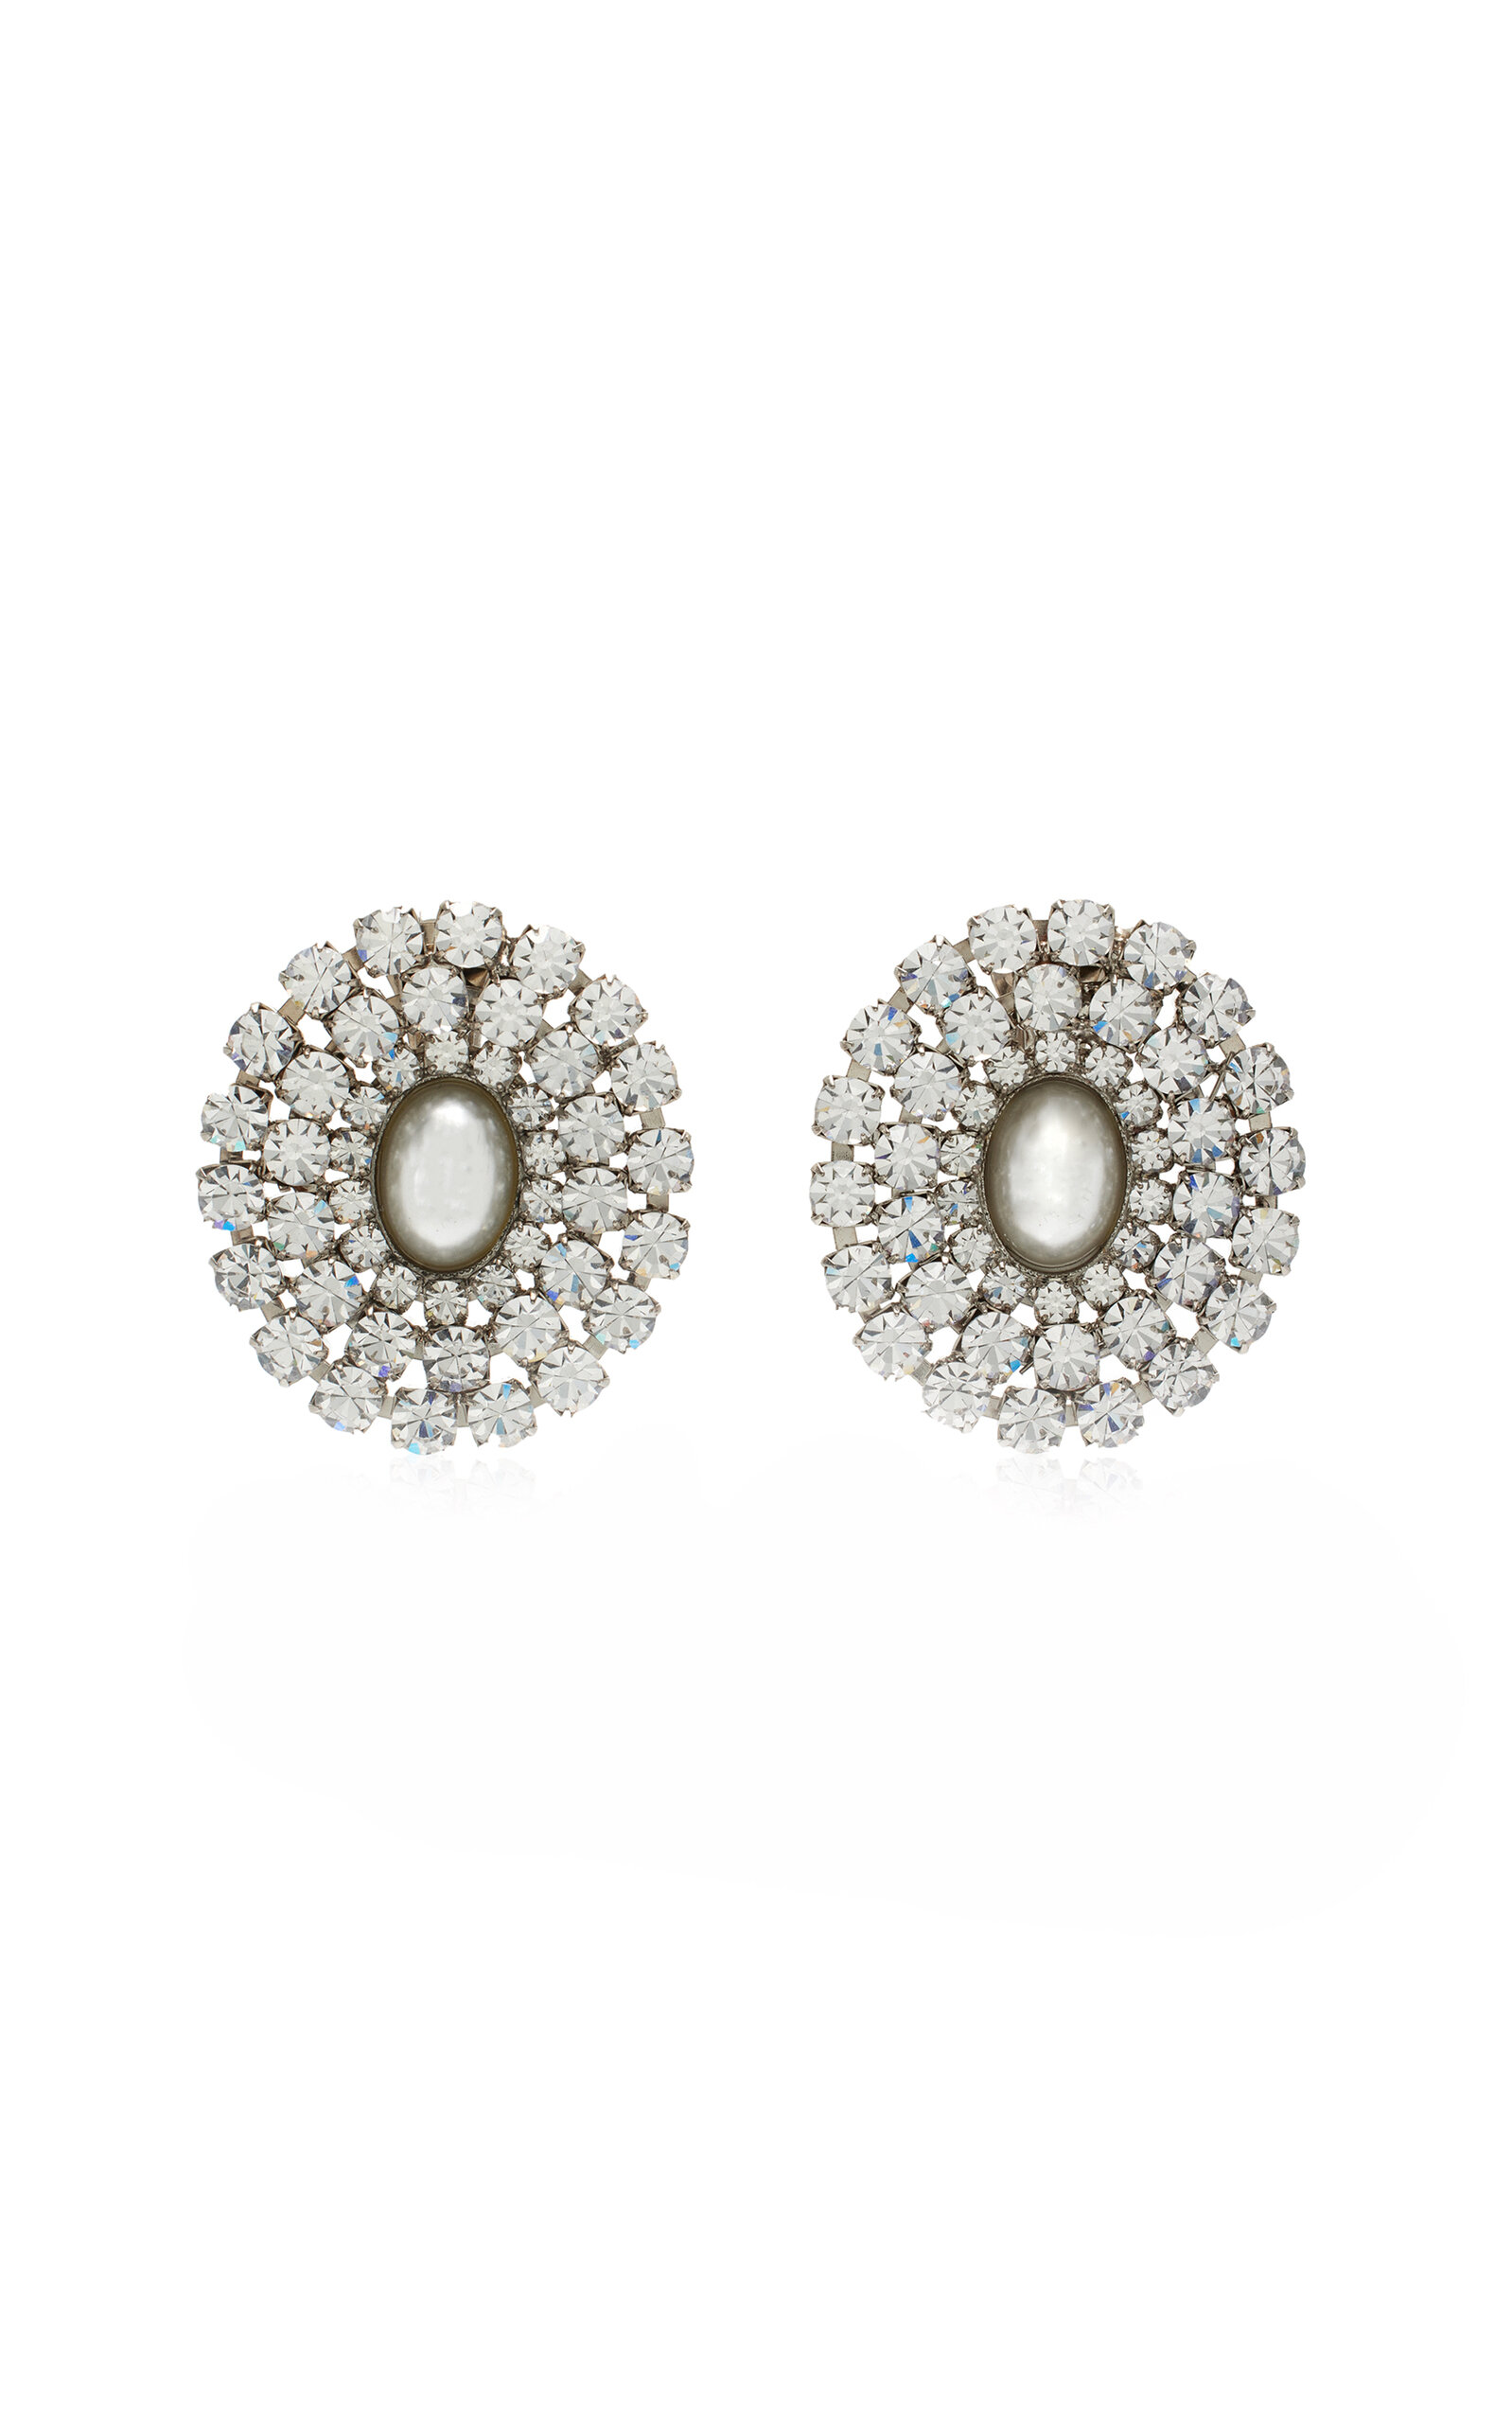 ALESSANDRA RICH SILVER-TONE CRYSTAL AND FAUX PEARL EARRINGS